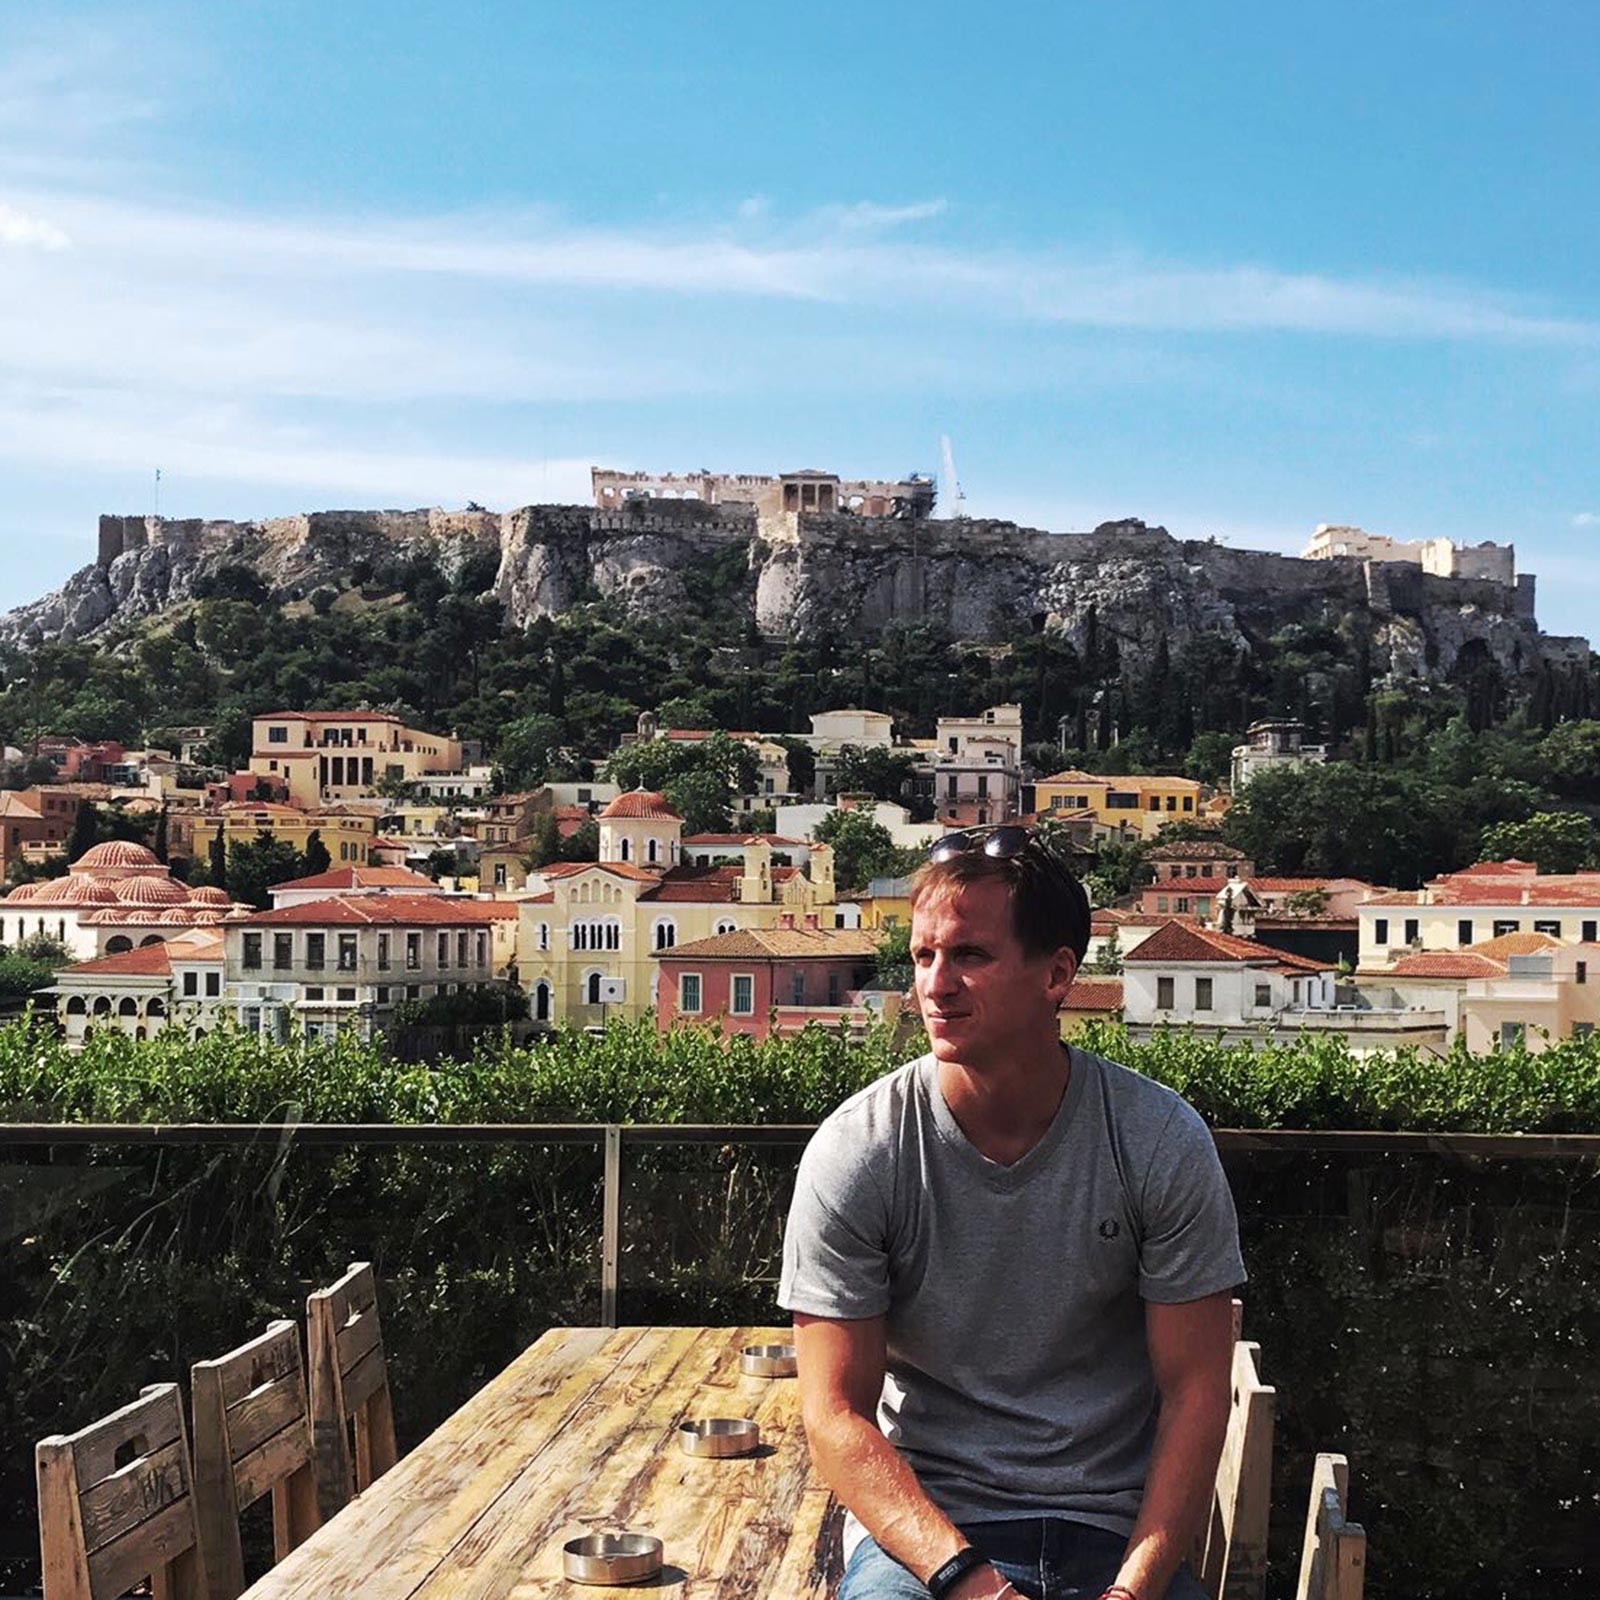 David Simpson and the Acropolis in Athens, Greece. Athens has me